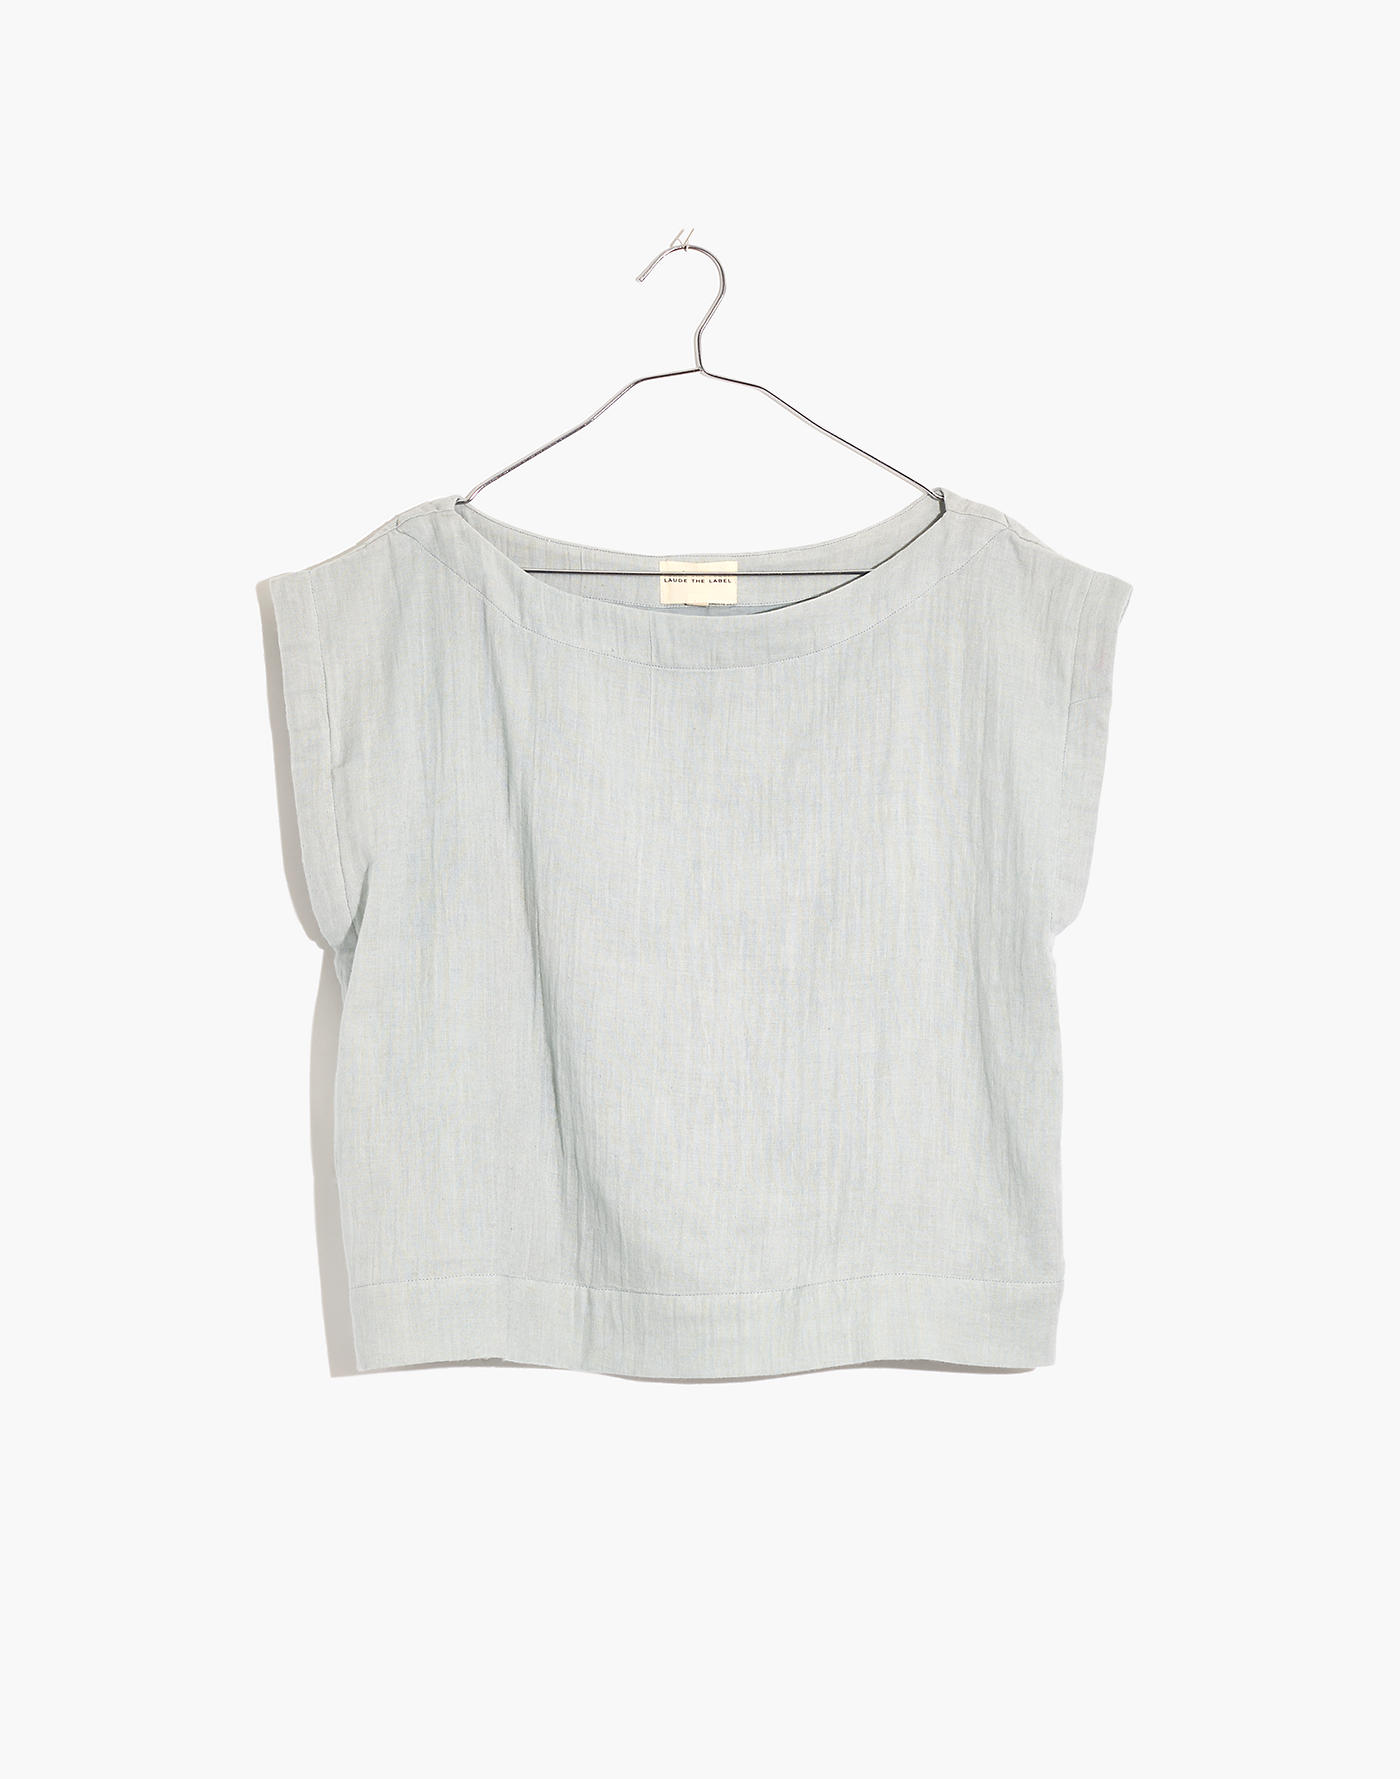 Madewell x LAUDE the Label Everyday Top